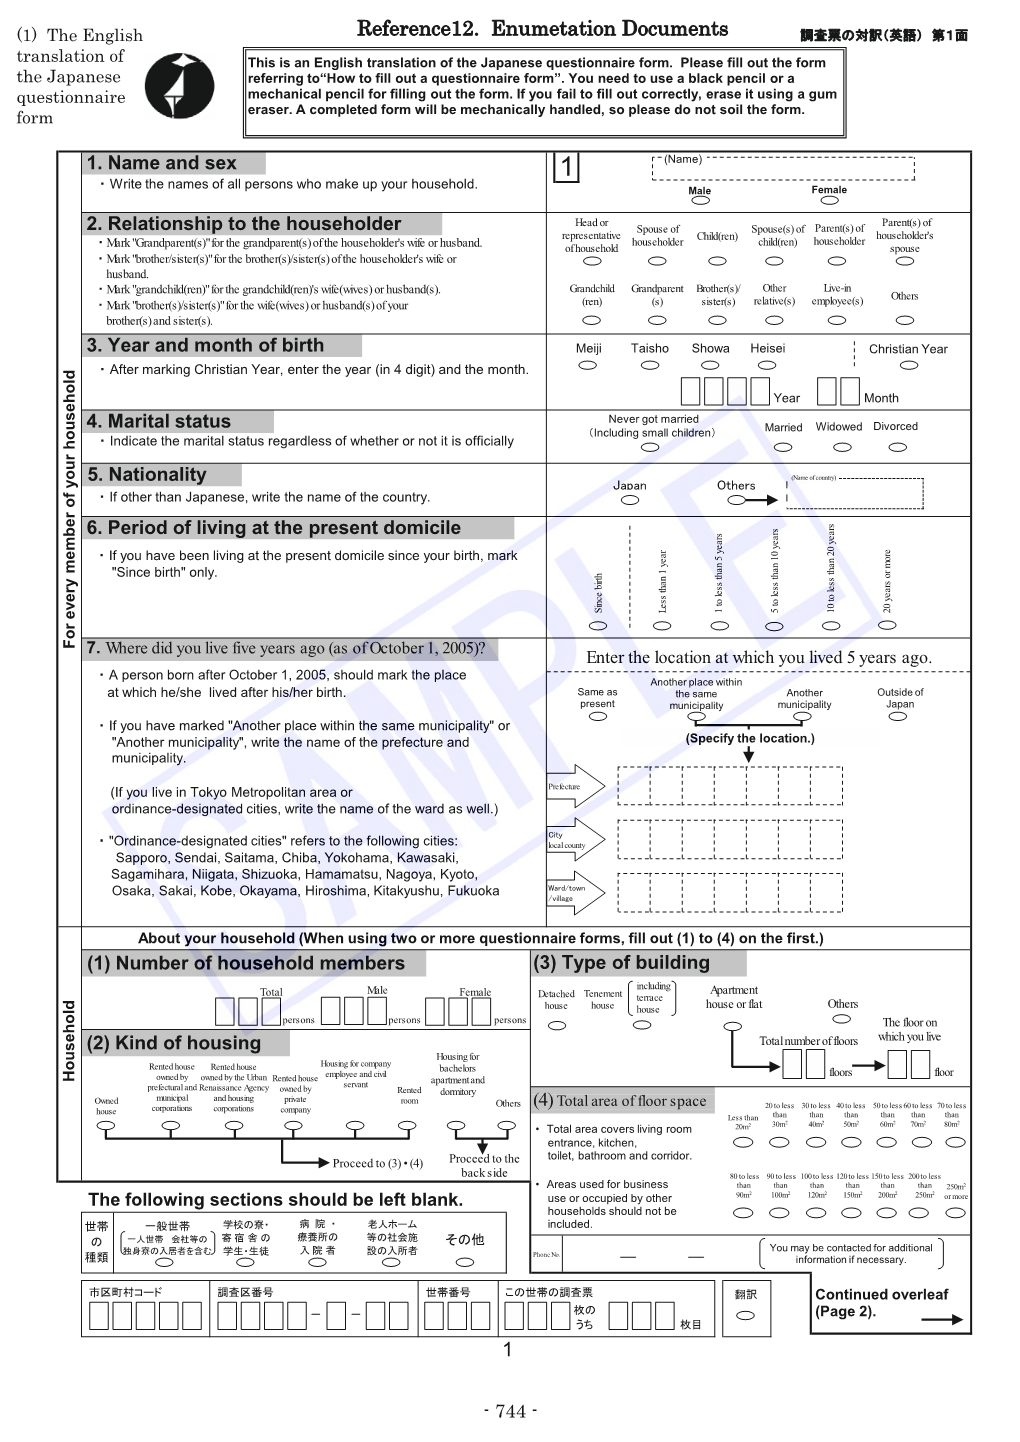 The English Translation of the Japanese Questionnaire Form (PDF:414KB)